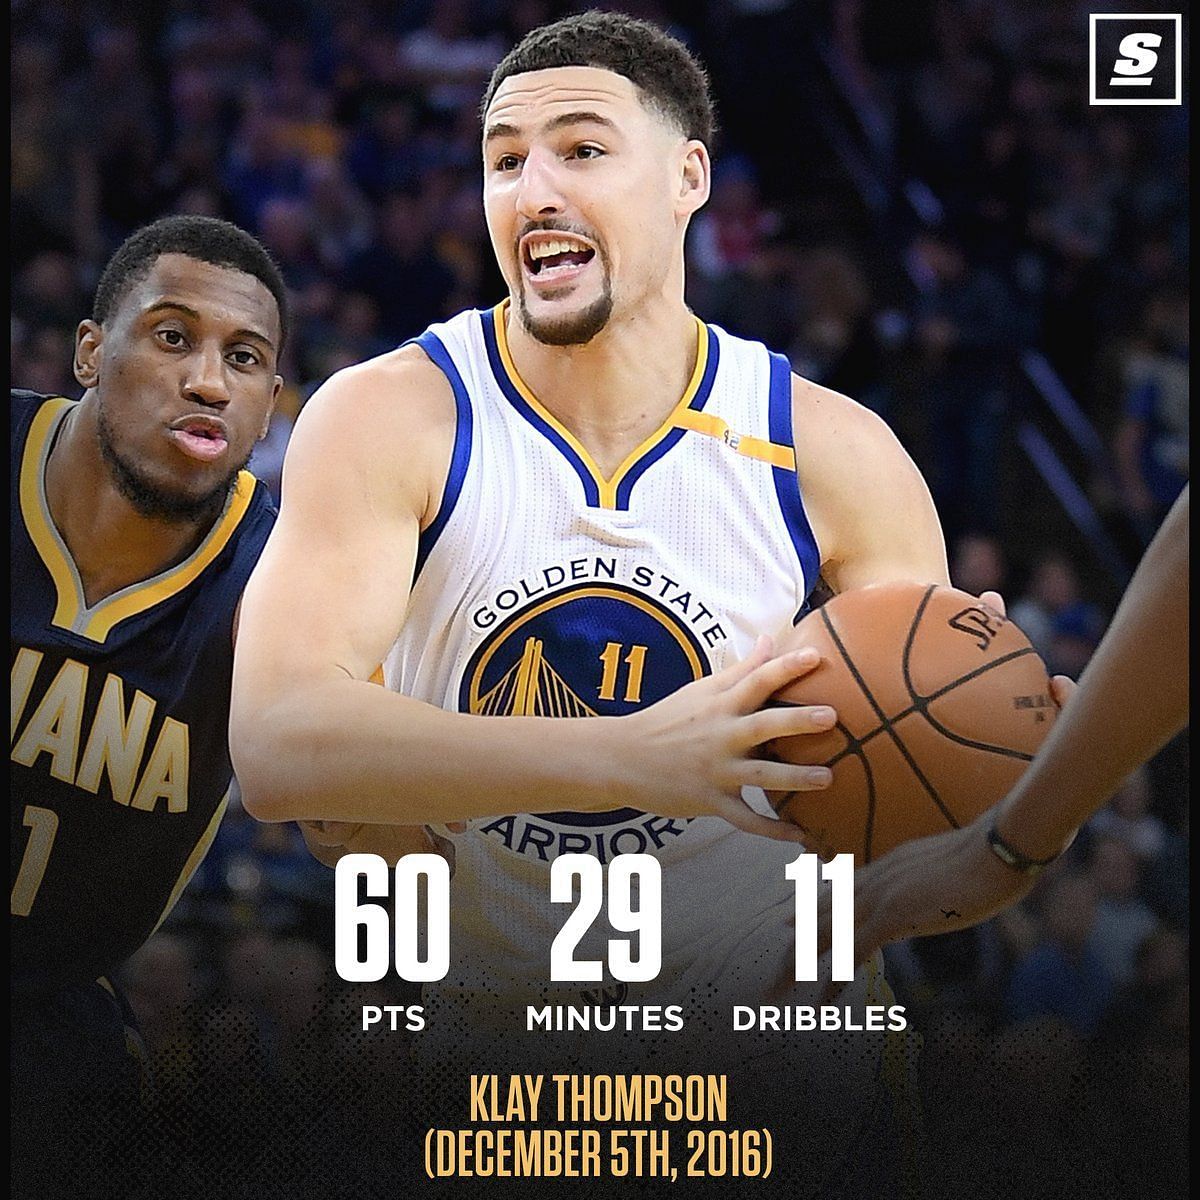 Watch Klay Thompson explodes for 60 points over 11 dribbles against